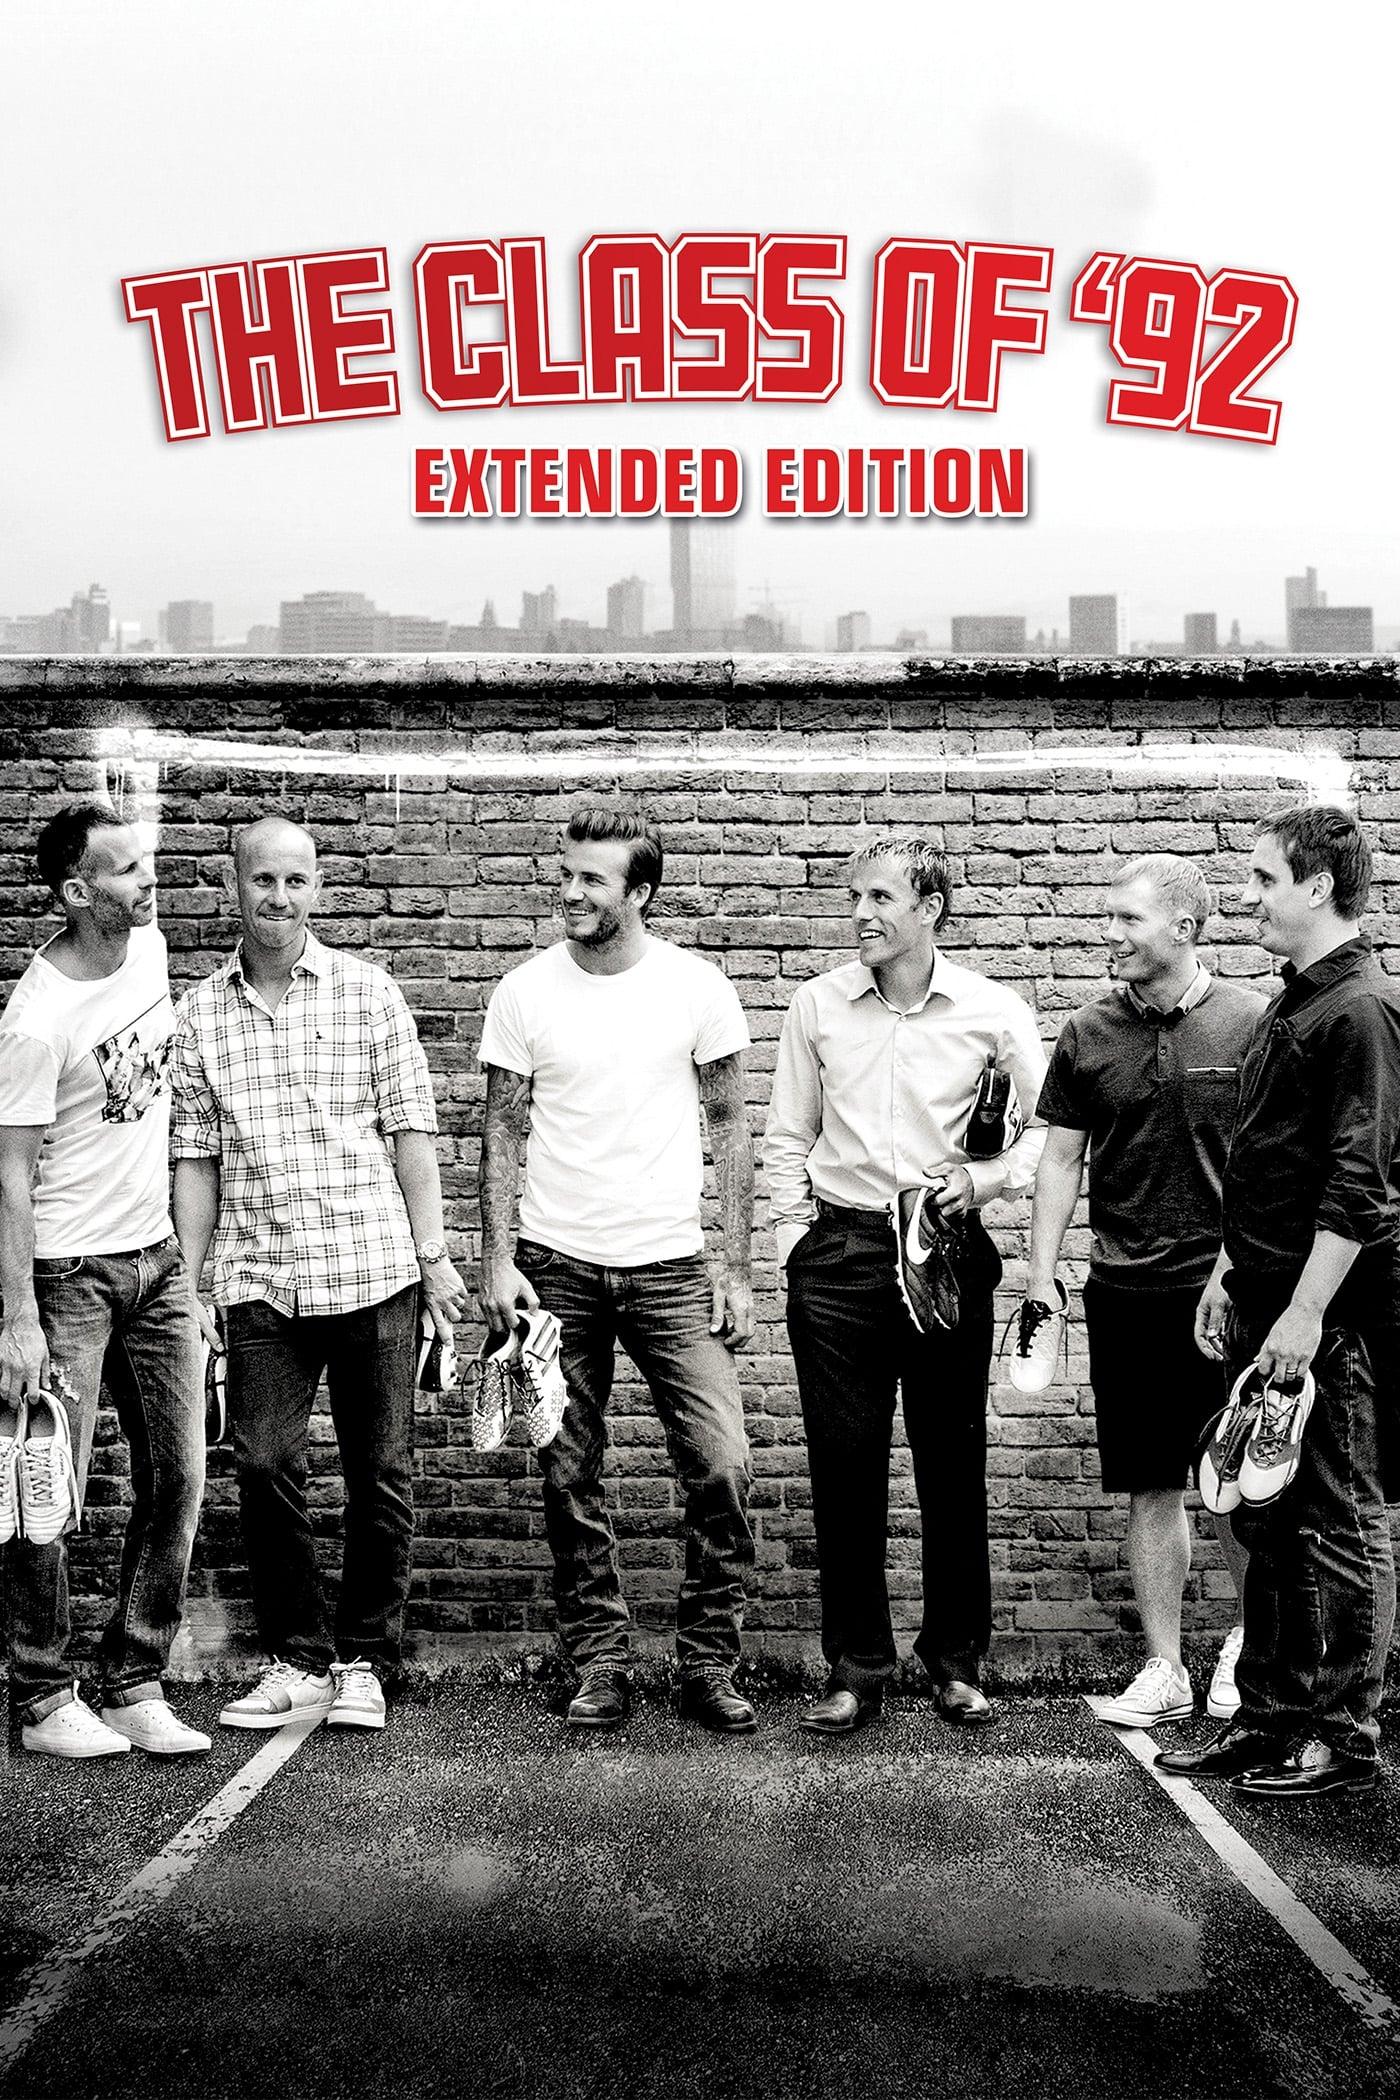 The Class of ‘92 poster